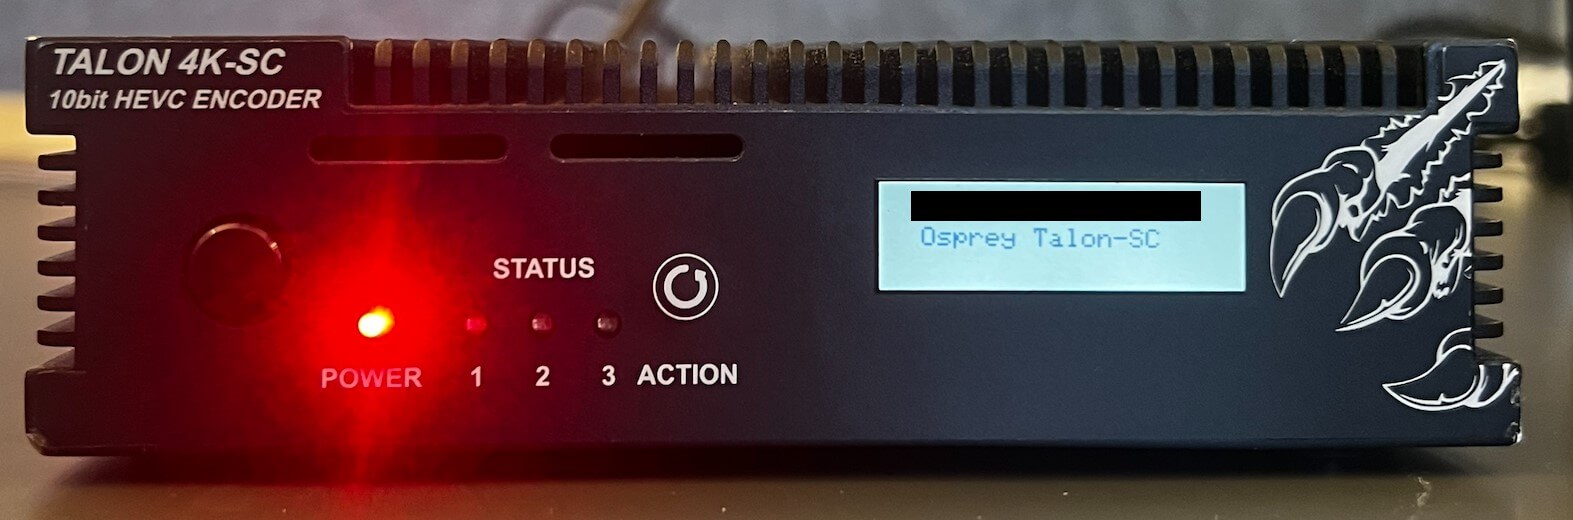 The image highlights the author holding the Osprey Talon encoder where the display on the encoder says the stream has started and the power button is lit up.